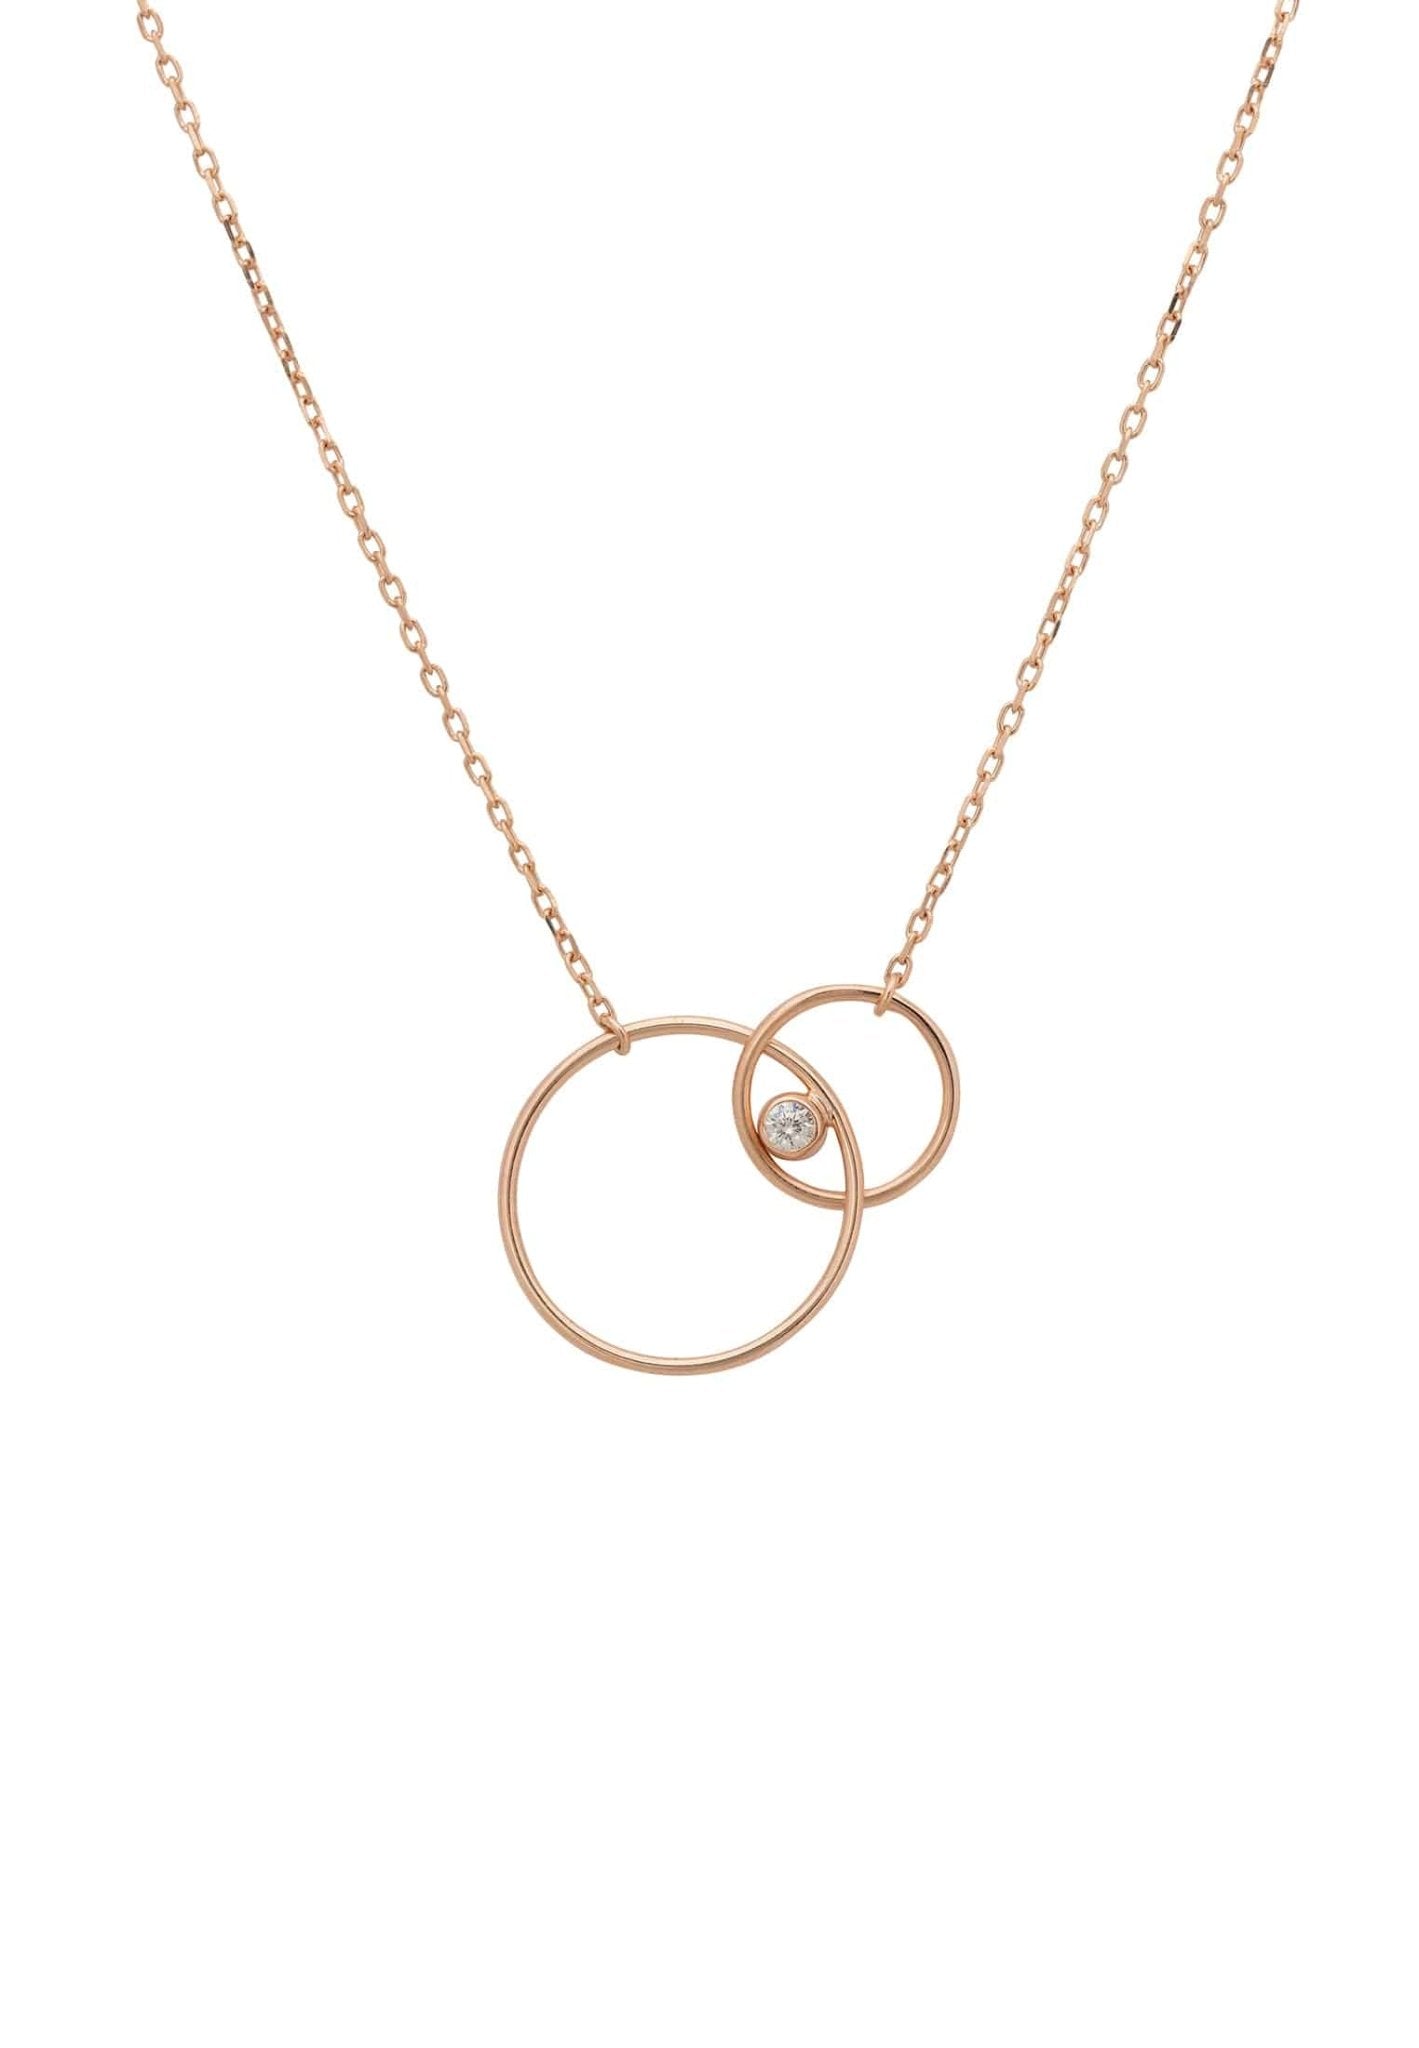 Family Circle Name Necklace - Rose Gold Paperclip Chain by Talisa